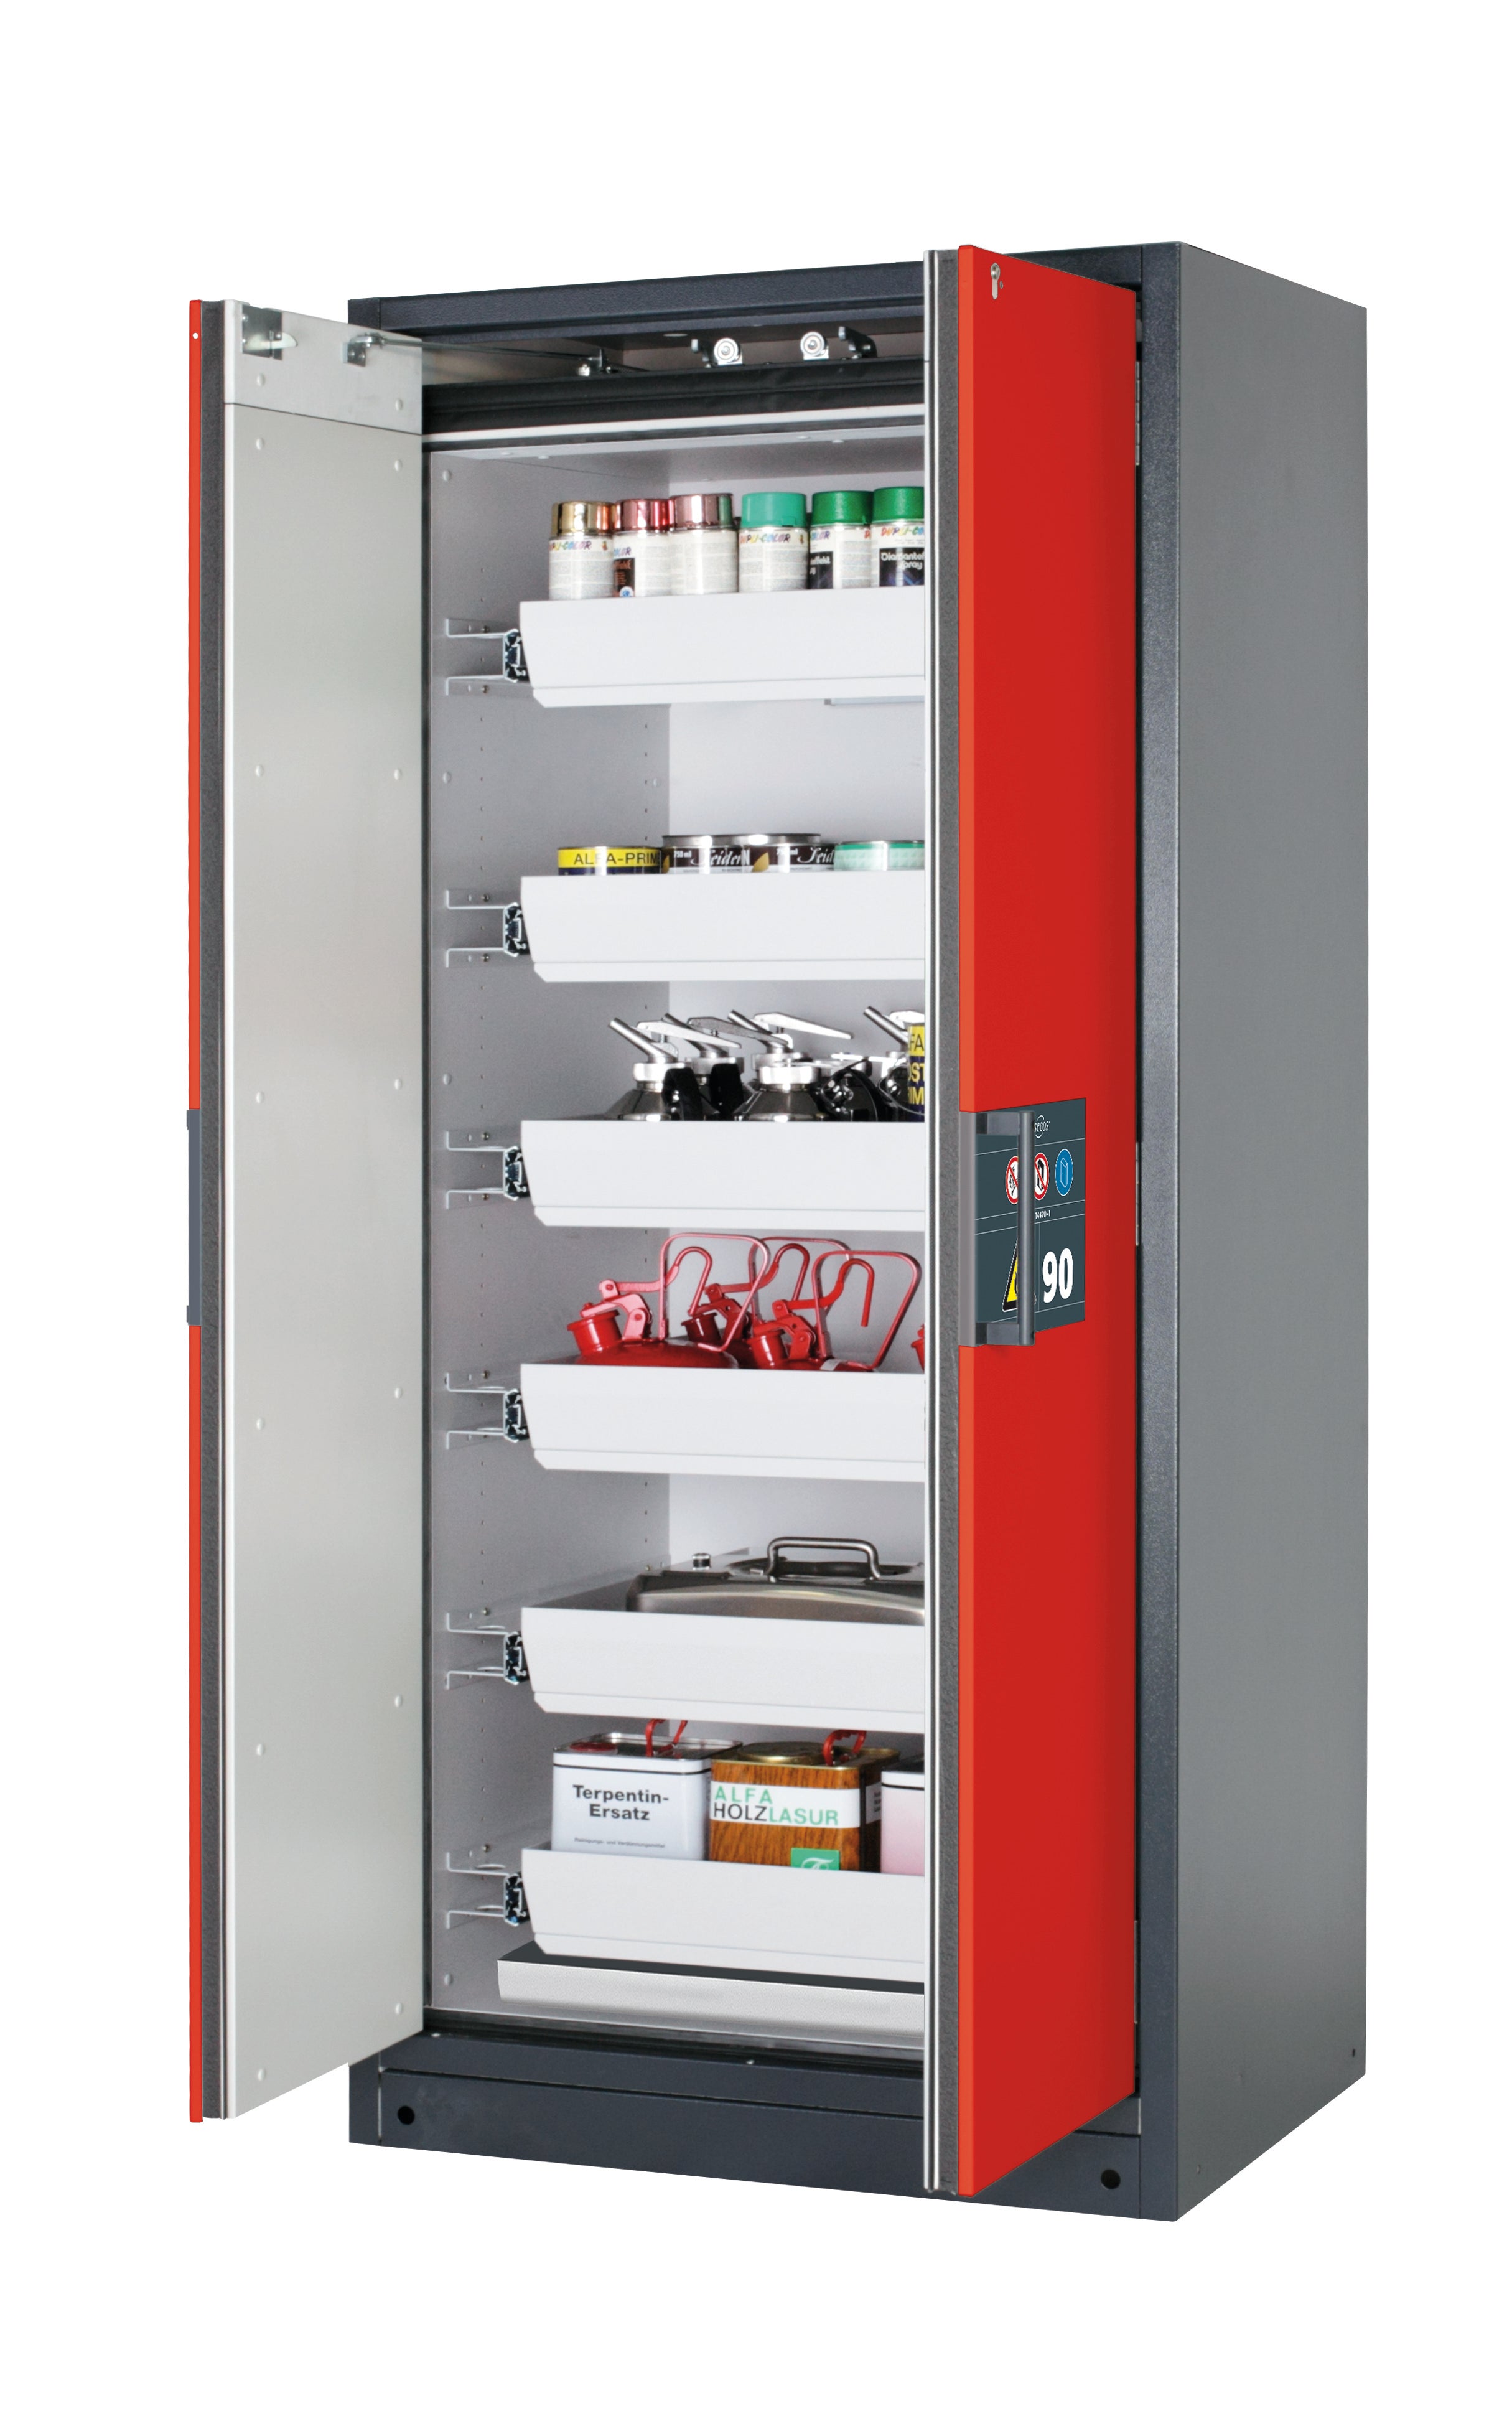 Type 90 safety storage cabinet Q-PEGASUS-90 model Q90.195.090.WDAC in traffic red RAL 3020 with 6x drawer (standard) (sheet steel),